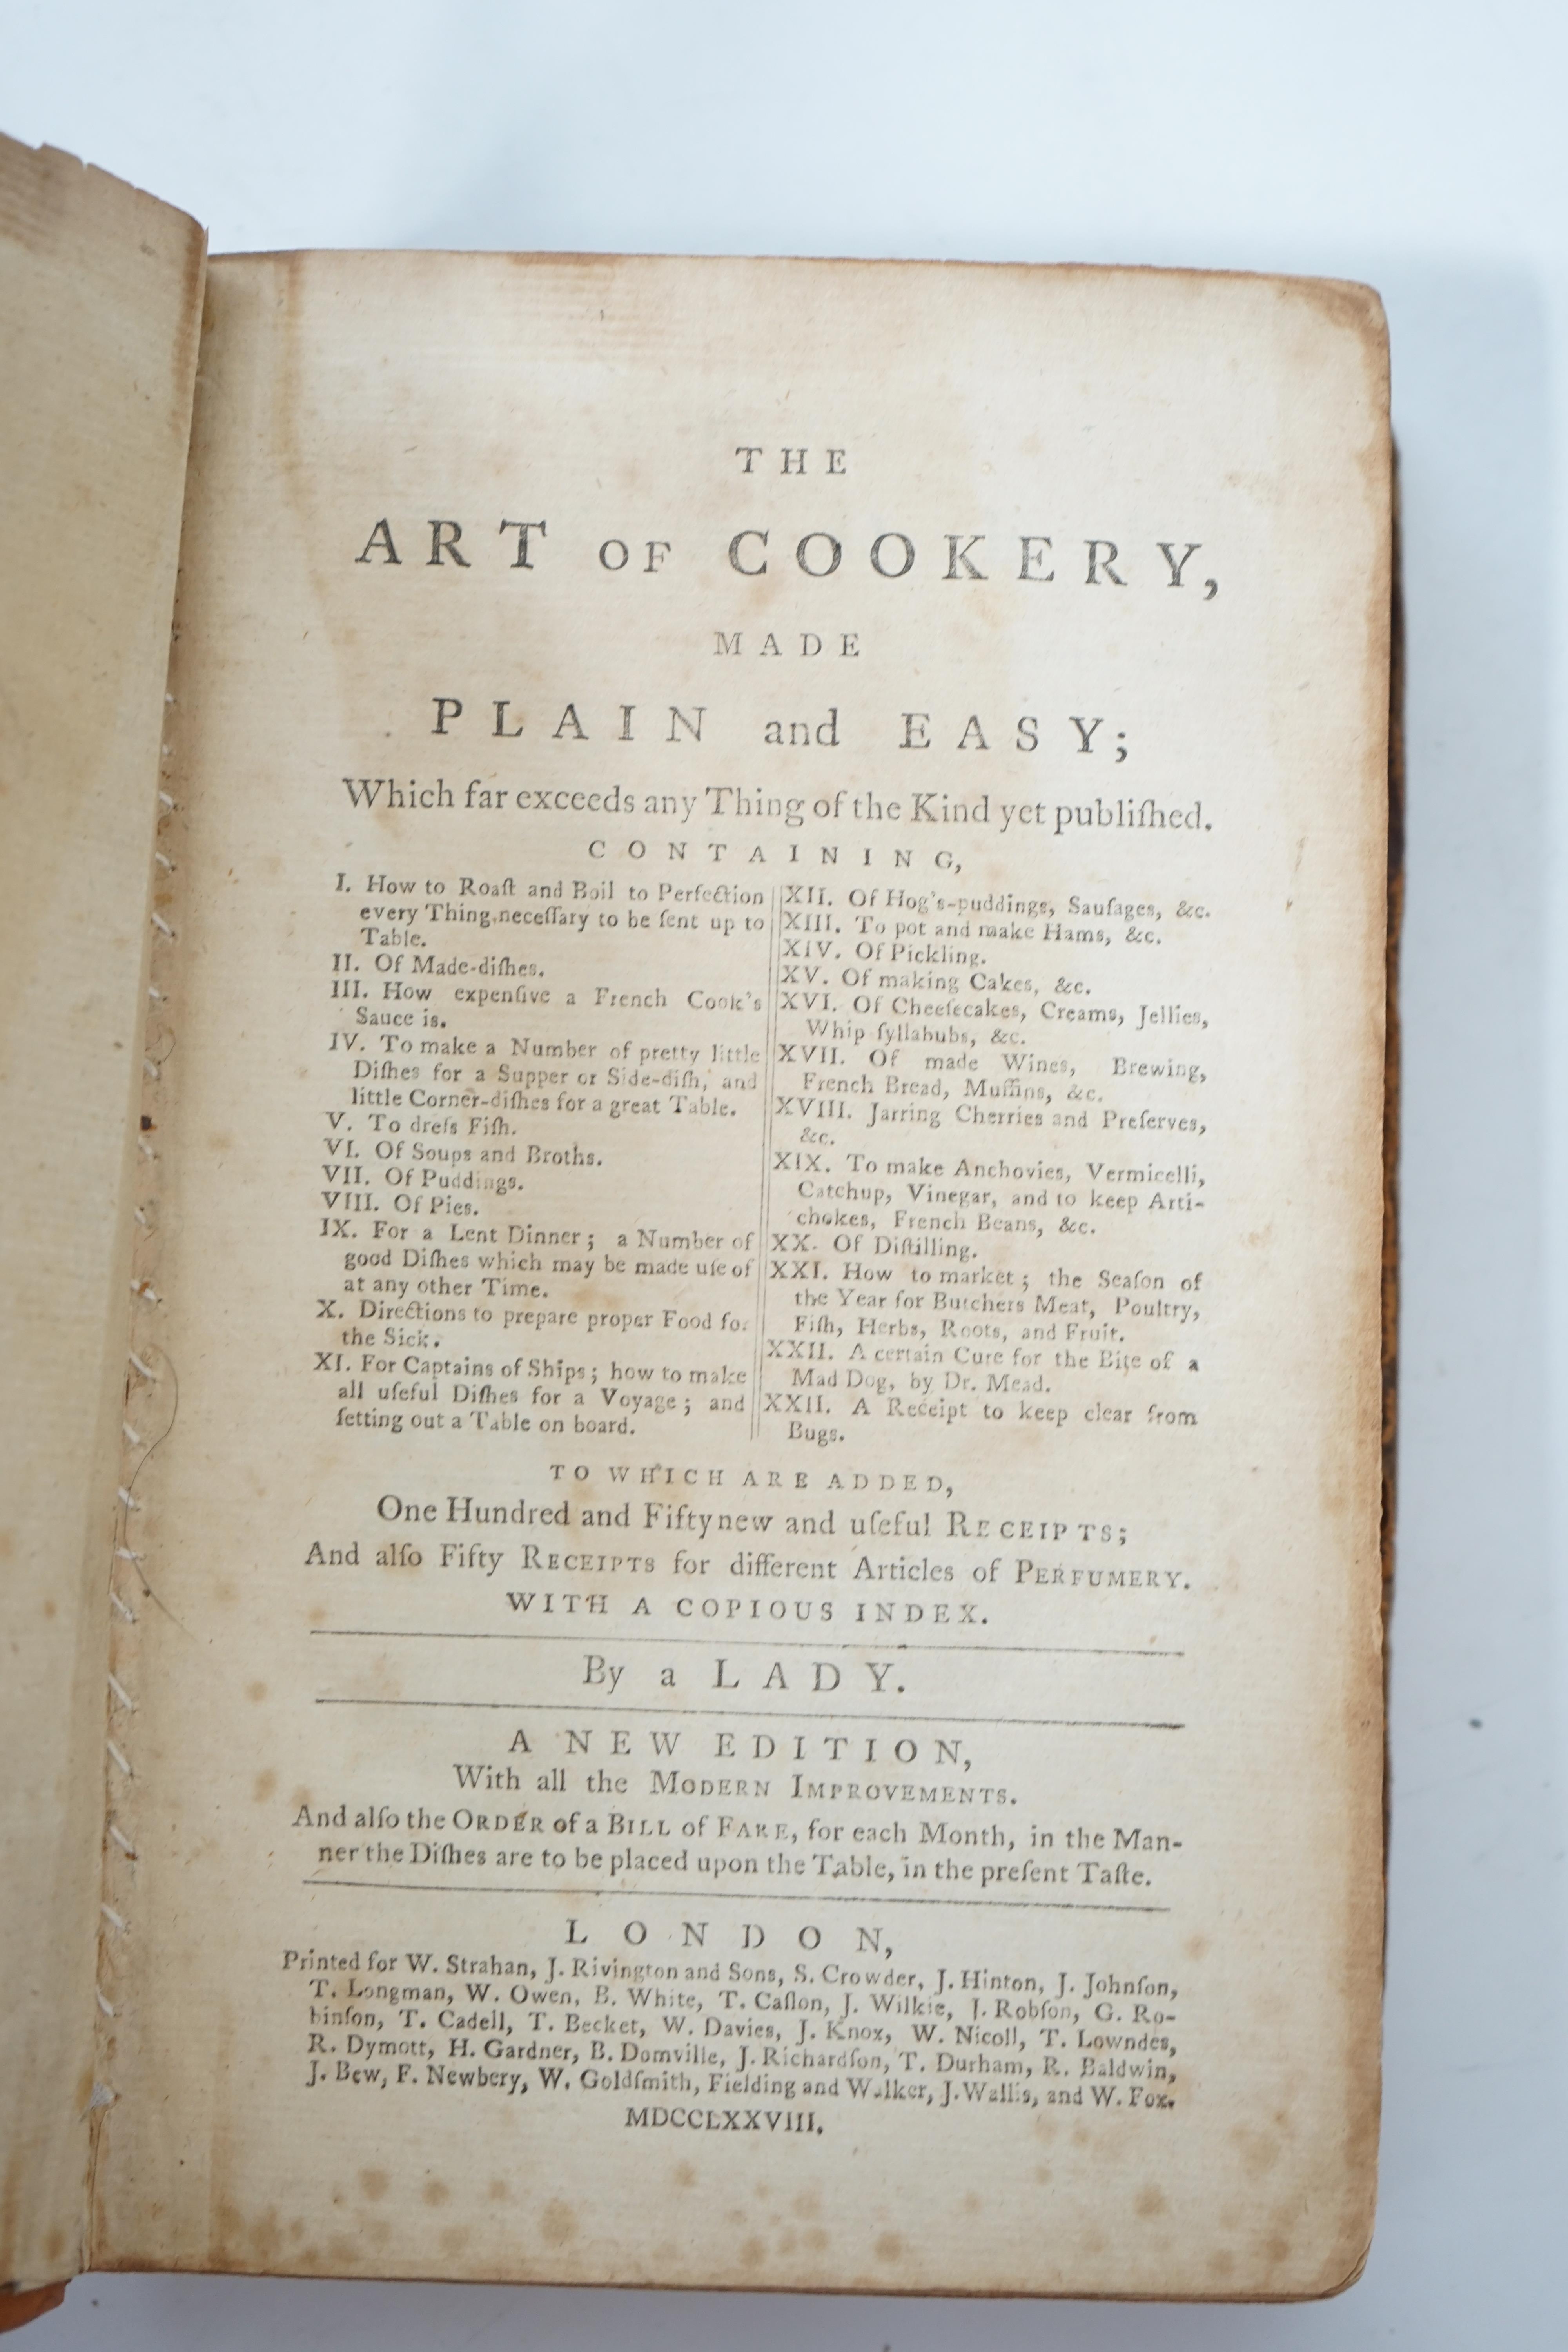 [Glasse, Hannah] The Art of Cookery made Plain and Easy. A New Edition With all the Modern Improvements, 8vo, calf rebacked, front fly inscribed - ‘‘Elizabeth Barker October 7th 1782 Her Book’’, W.Strahan et al, London,